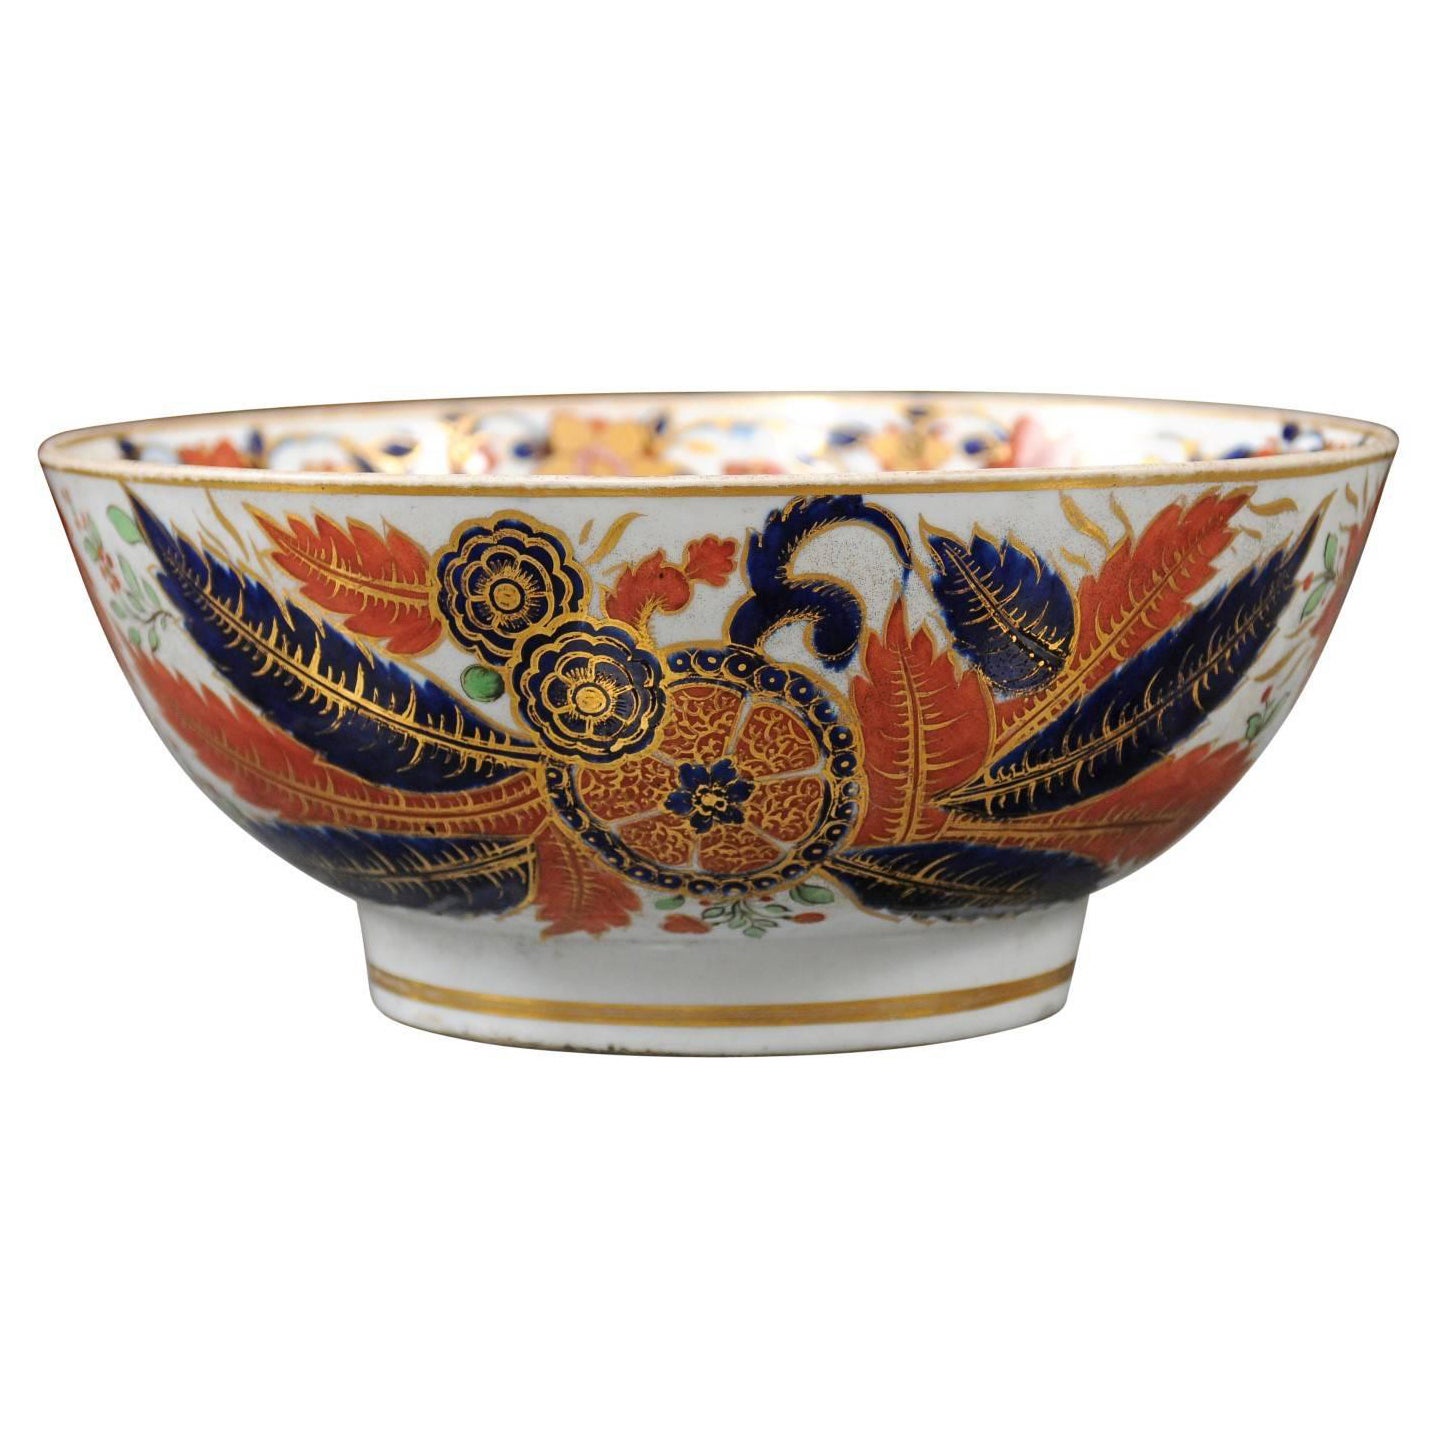 Spode “Tabacco Leaf” Punch Bowl after Chinese Export Design, England, ca. 1820 For Sale